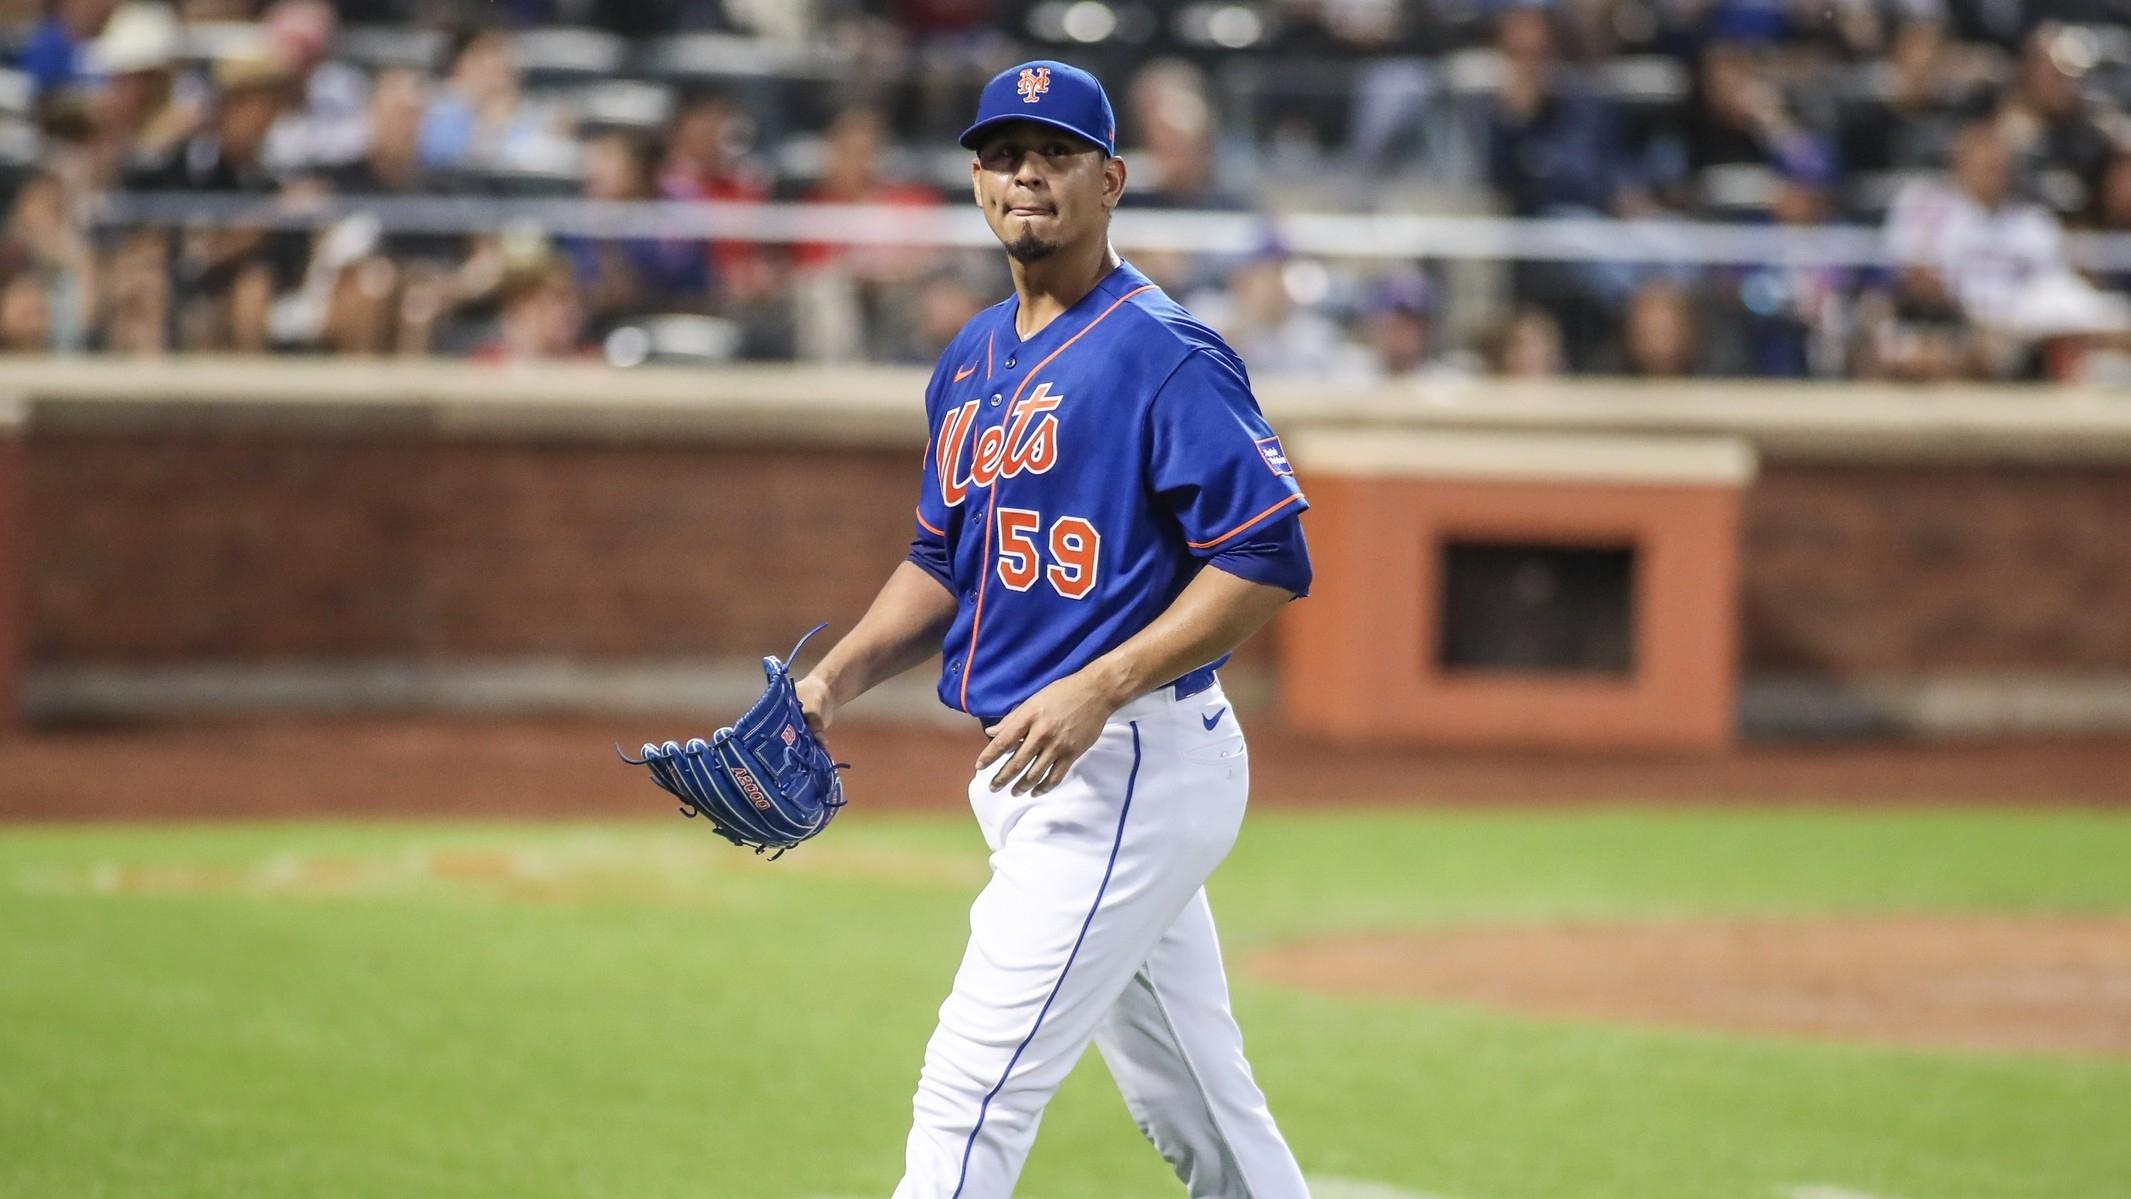 New York Mets starting pitcher Carlos Carrasco (59) walks off the field after being taken out in the second inning against the Los Angeles Angels at Citi Field. / Wendell Cruz-USA TODAY Sports